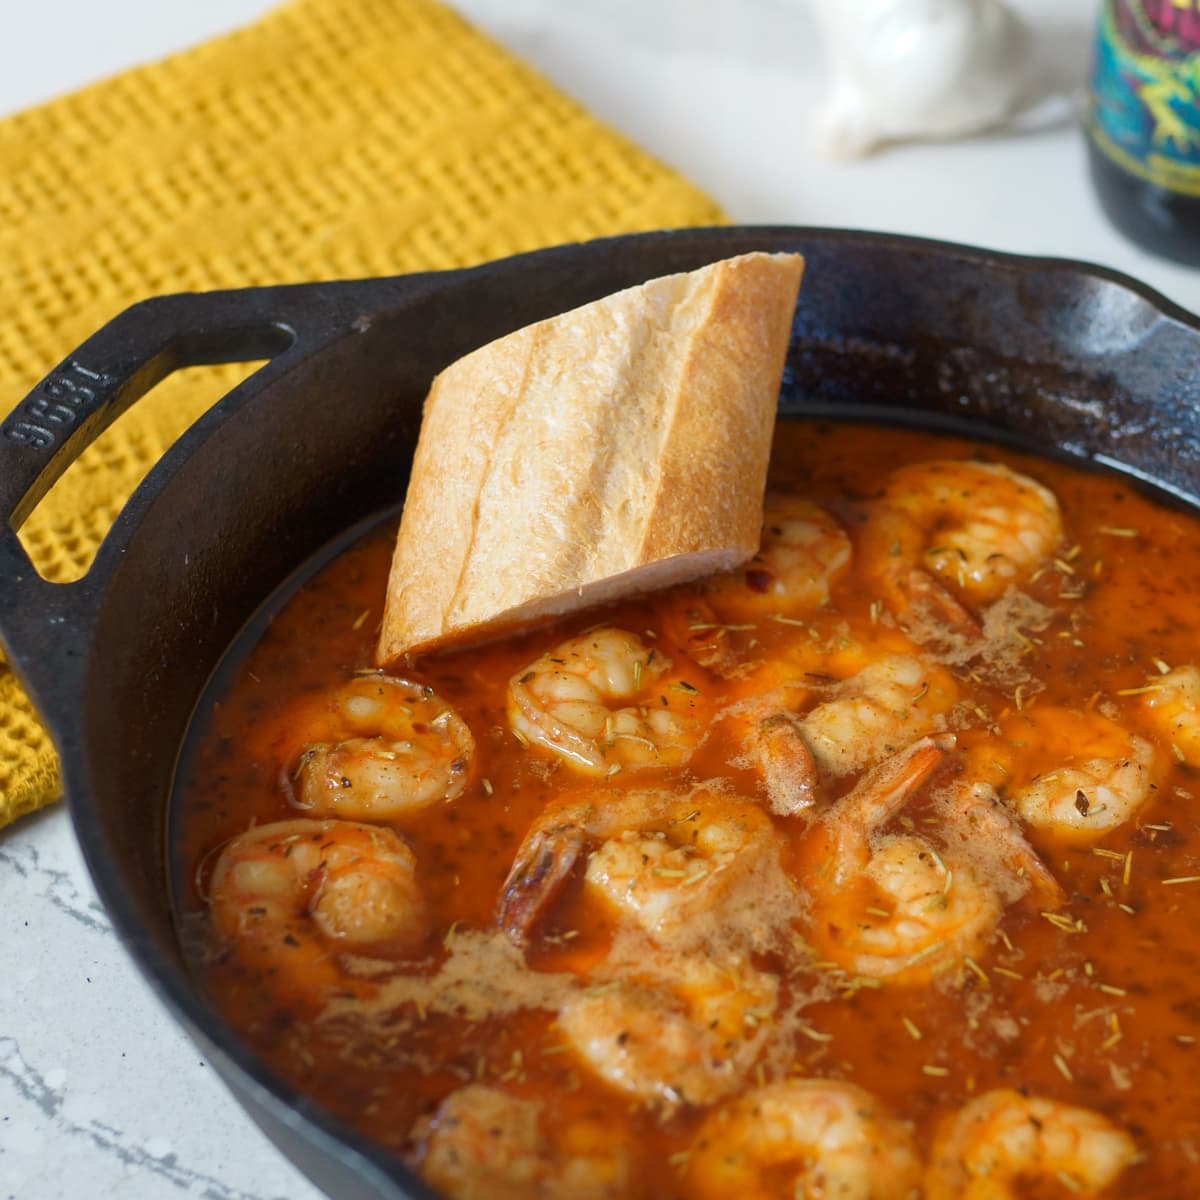 Cast iron Creole style shrimp with a slice of baguette.